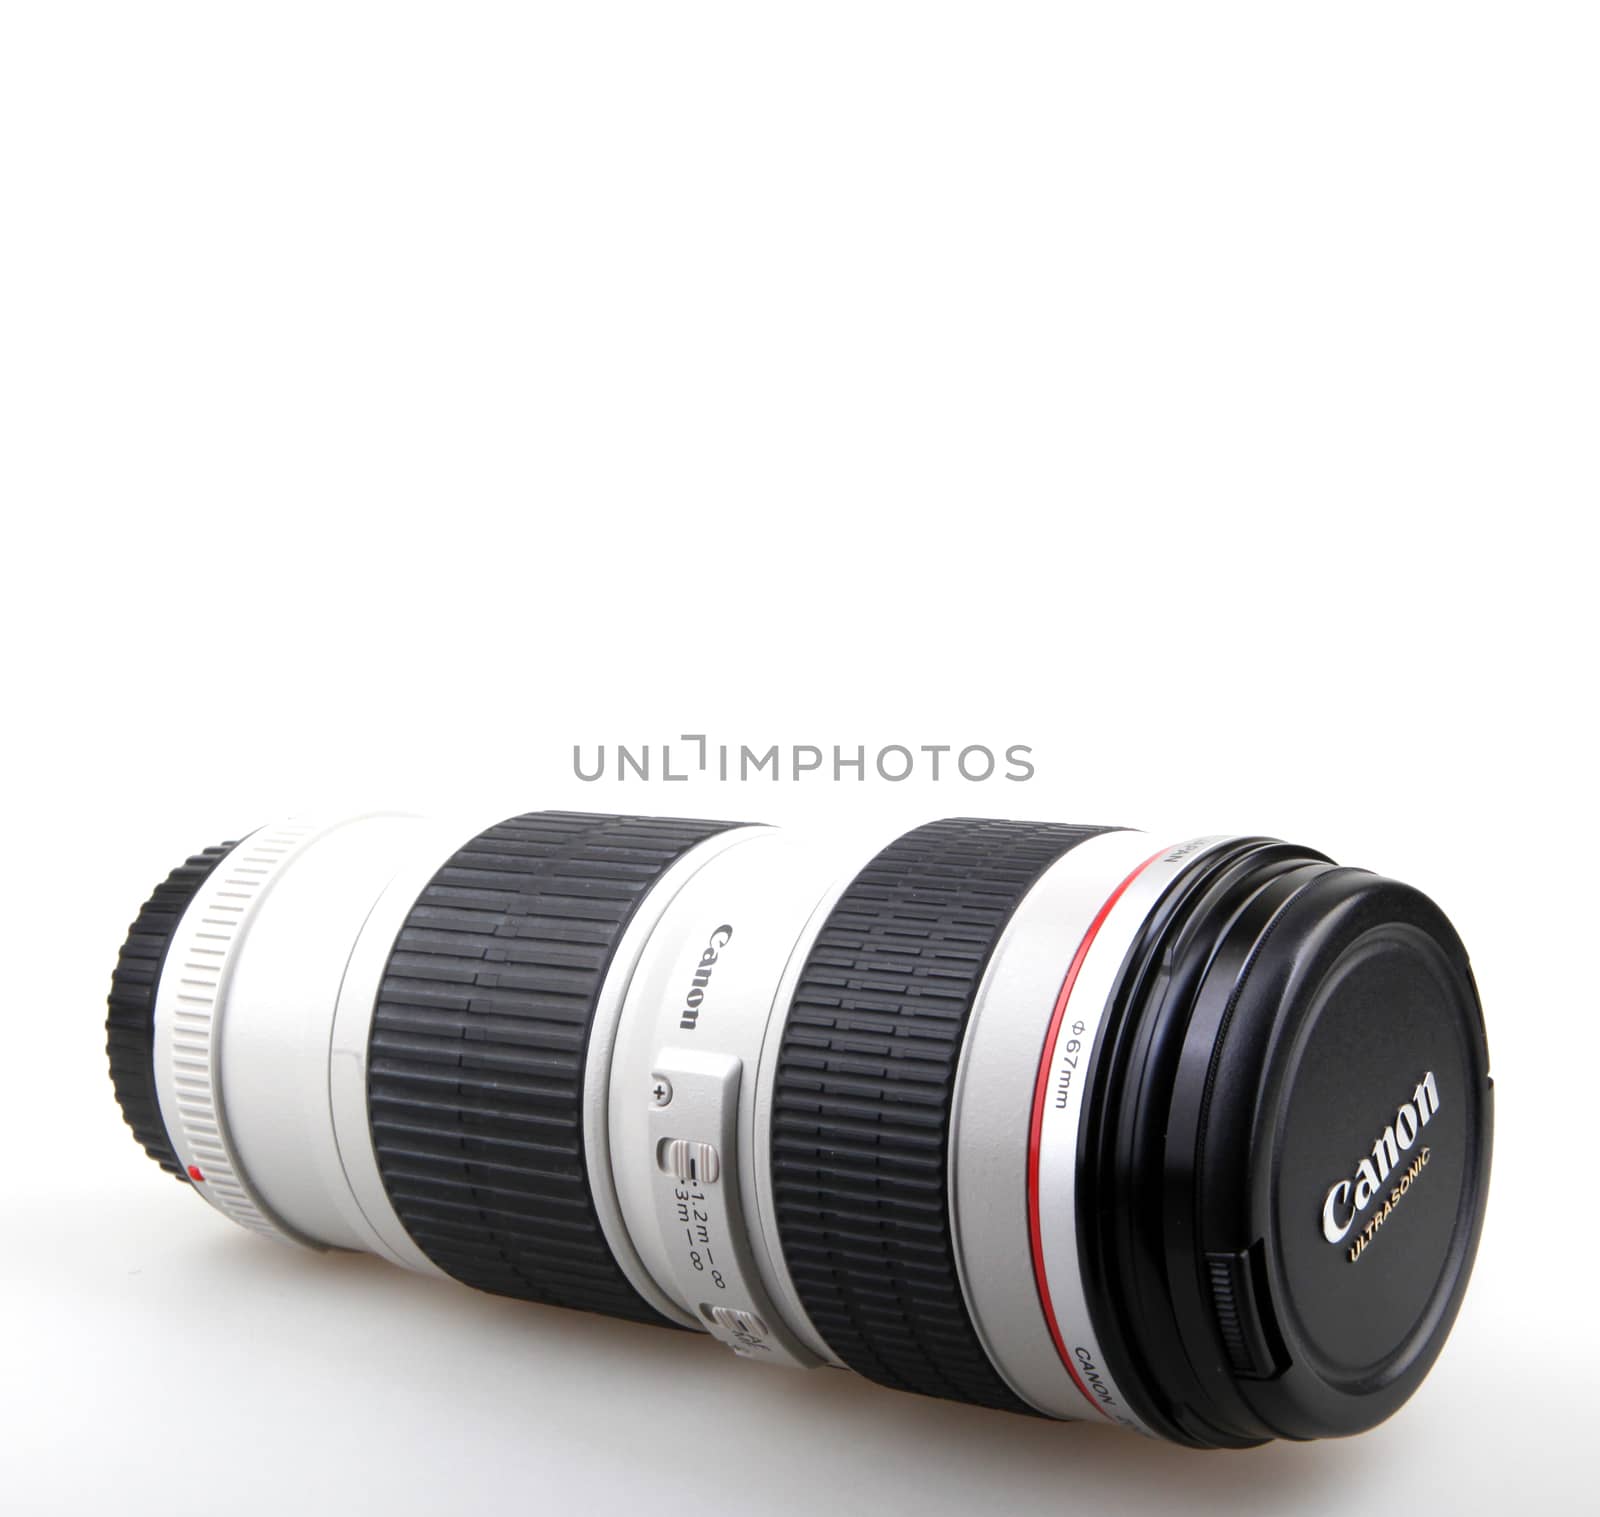 AYTOS, BULGARIA - DECEMBER 11, 2015: Canon EF 70-200mm f/4L USM Lens. Canon Inc. is a Japanese multinational corporation specialized in the manufacture of imaging and optical products. by nenov